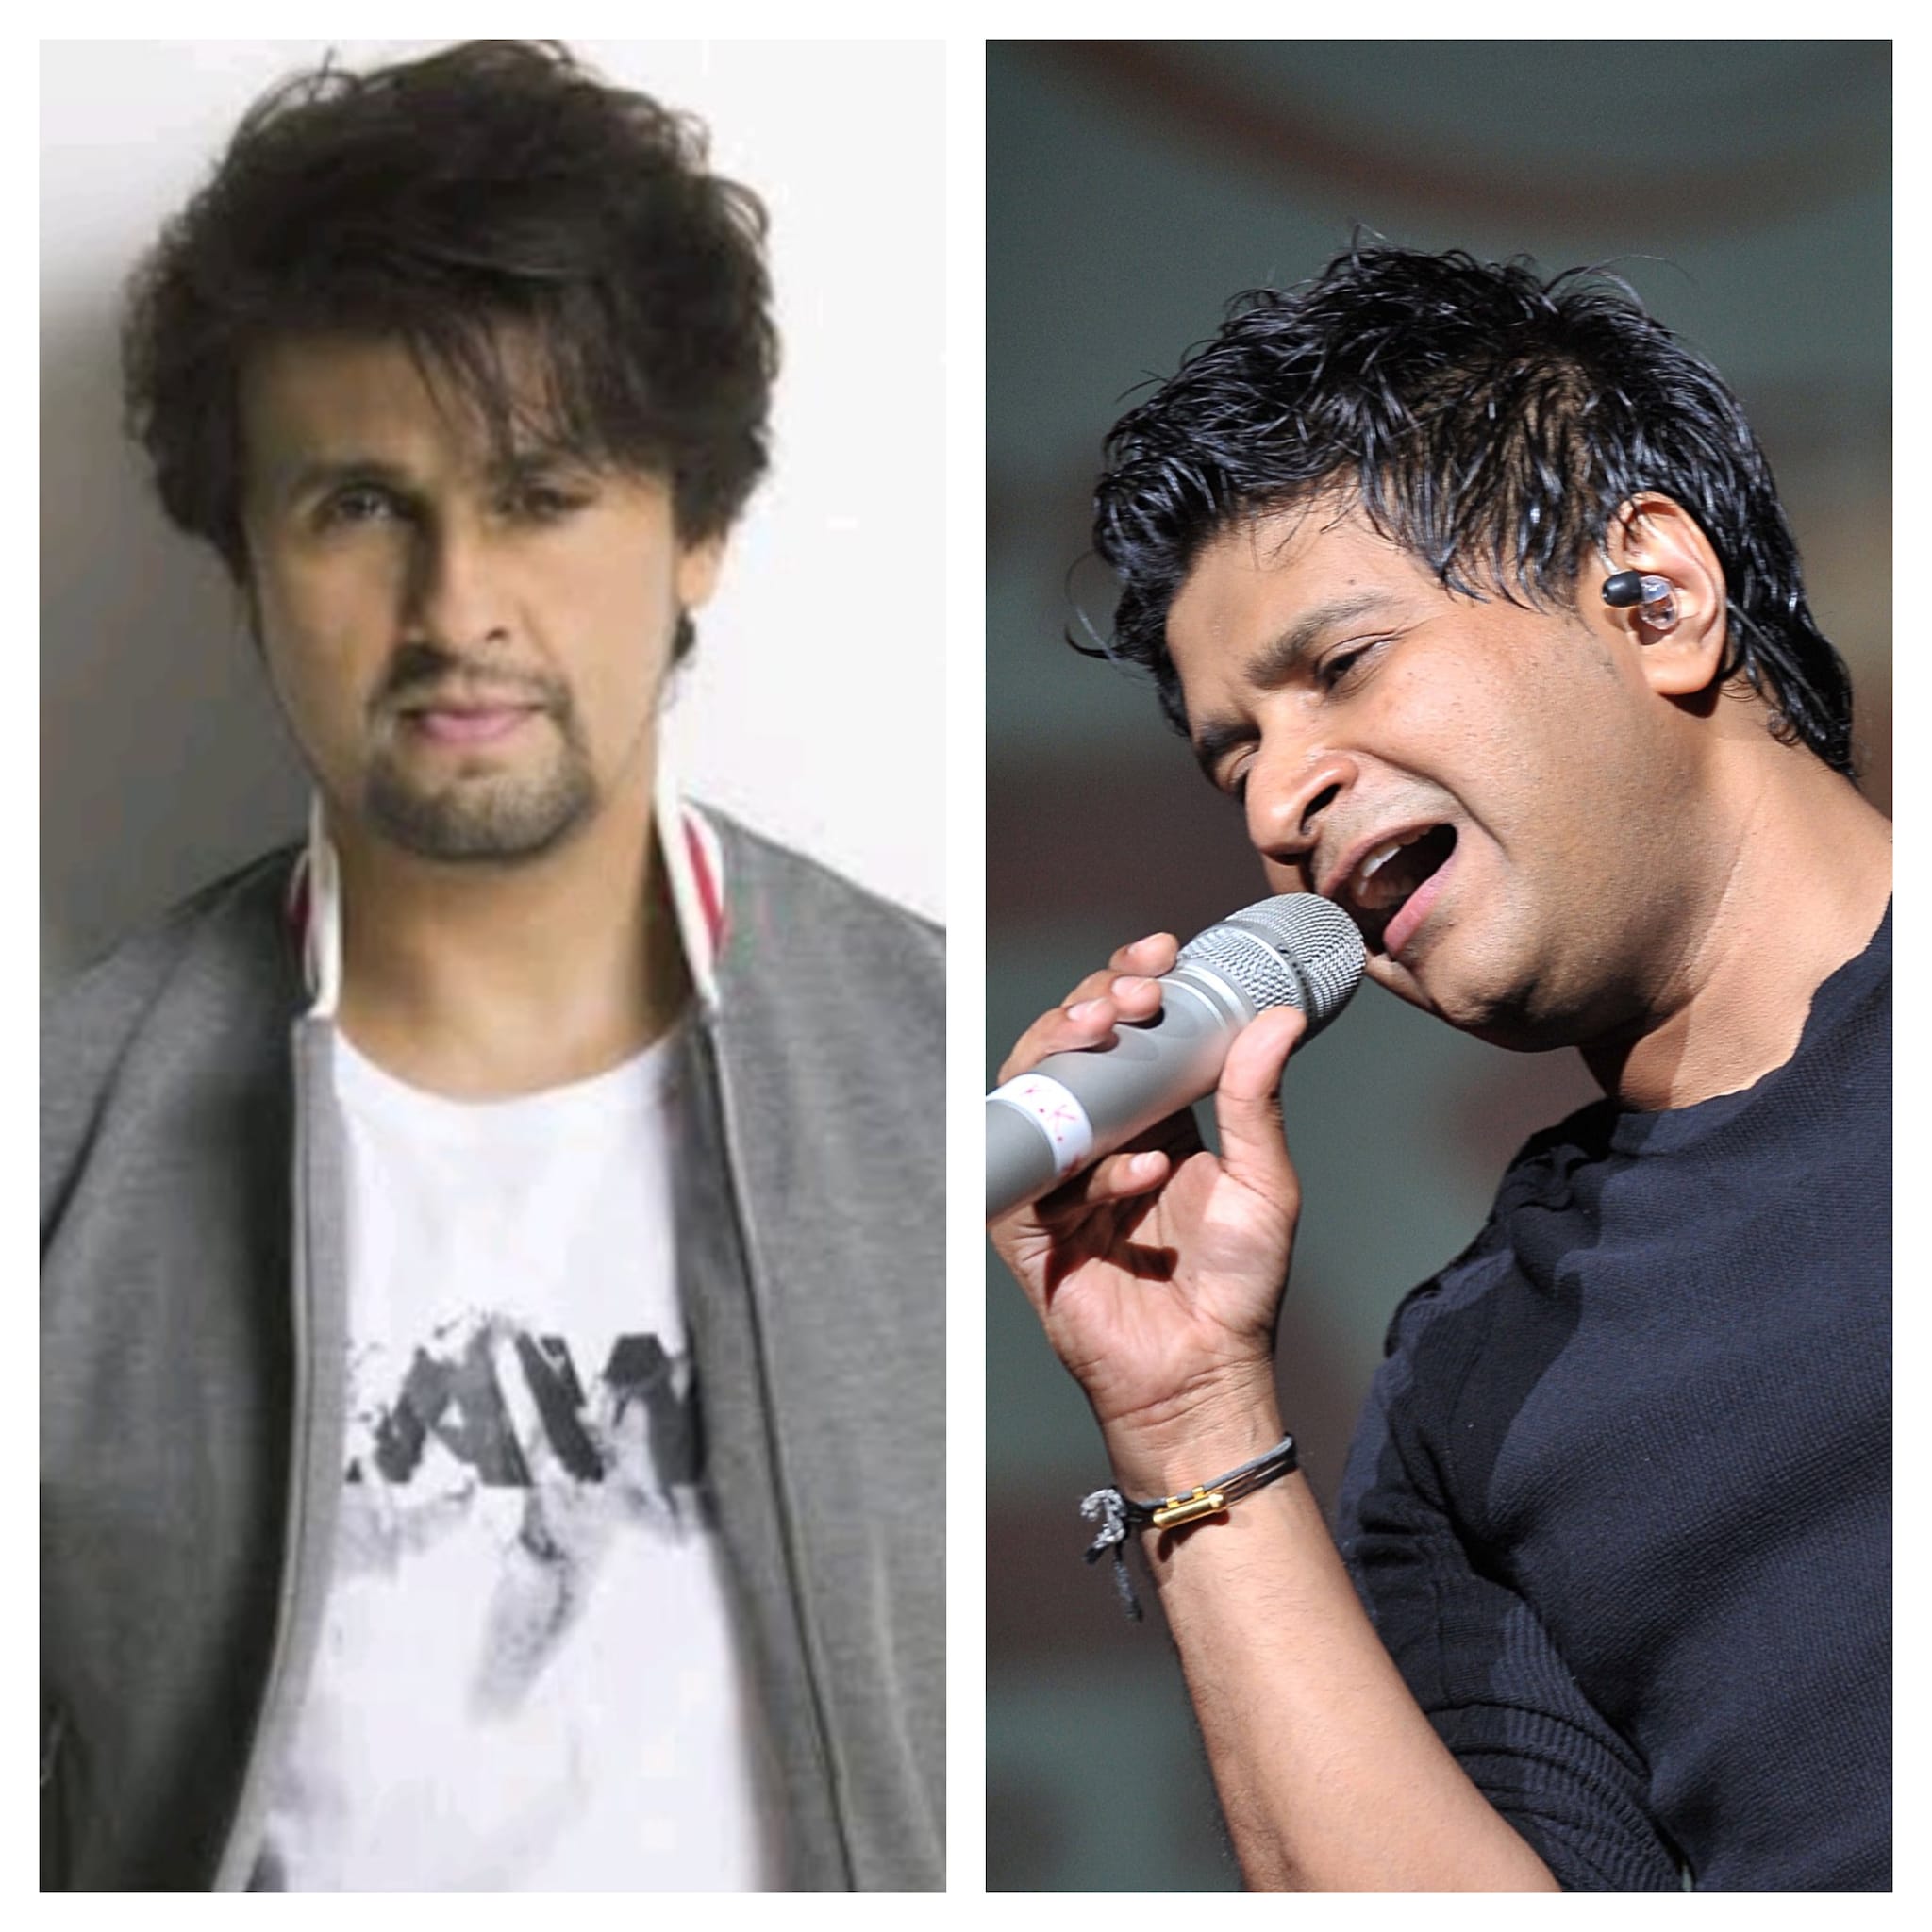 Sonu Nigam Images Wallpapers